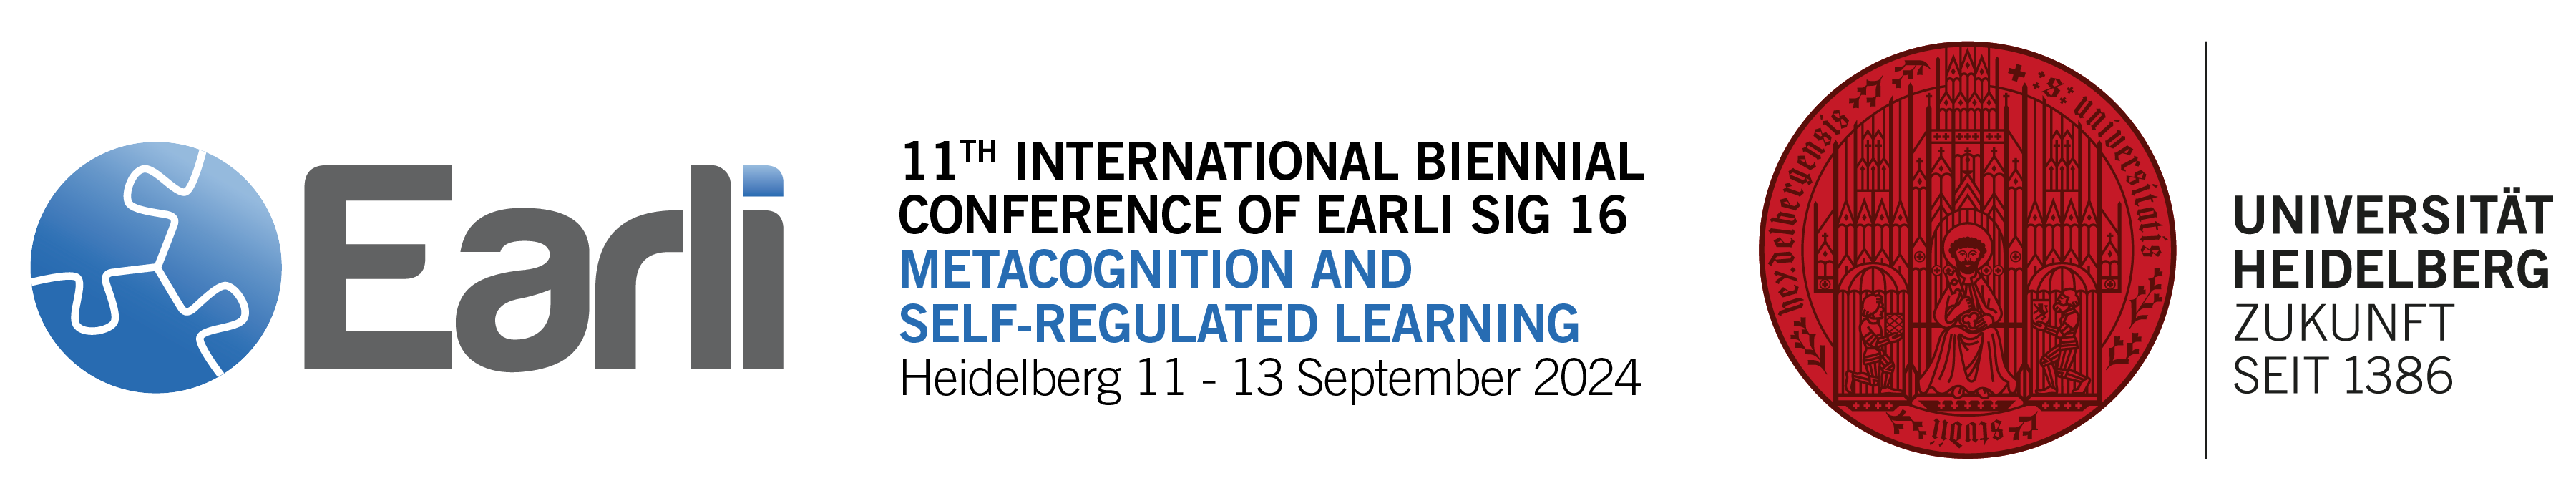 Logo EARLI SIG 16 Metacognition and Self-Regulated Learning Conference 2024